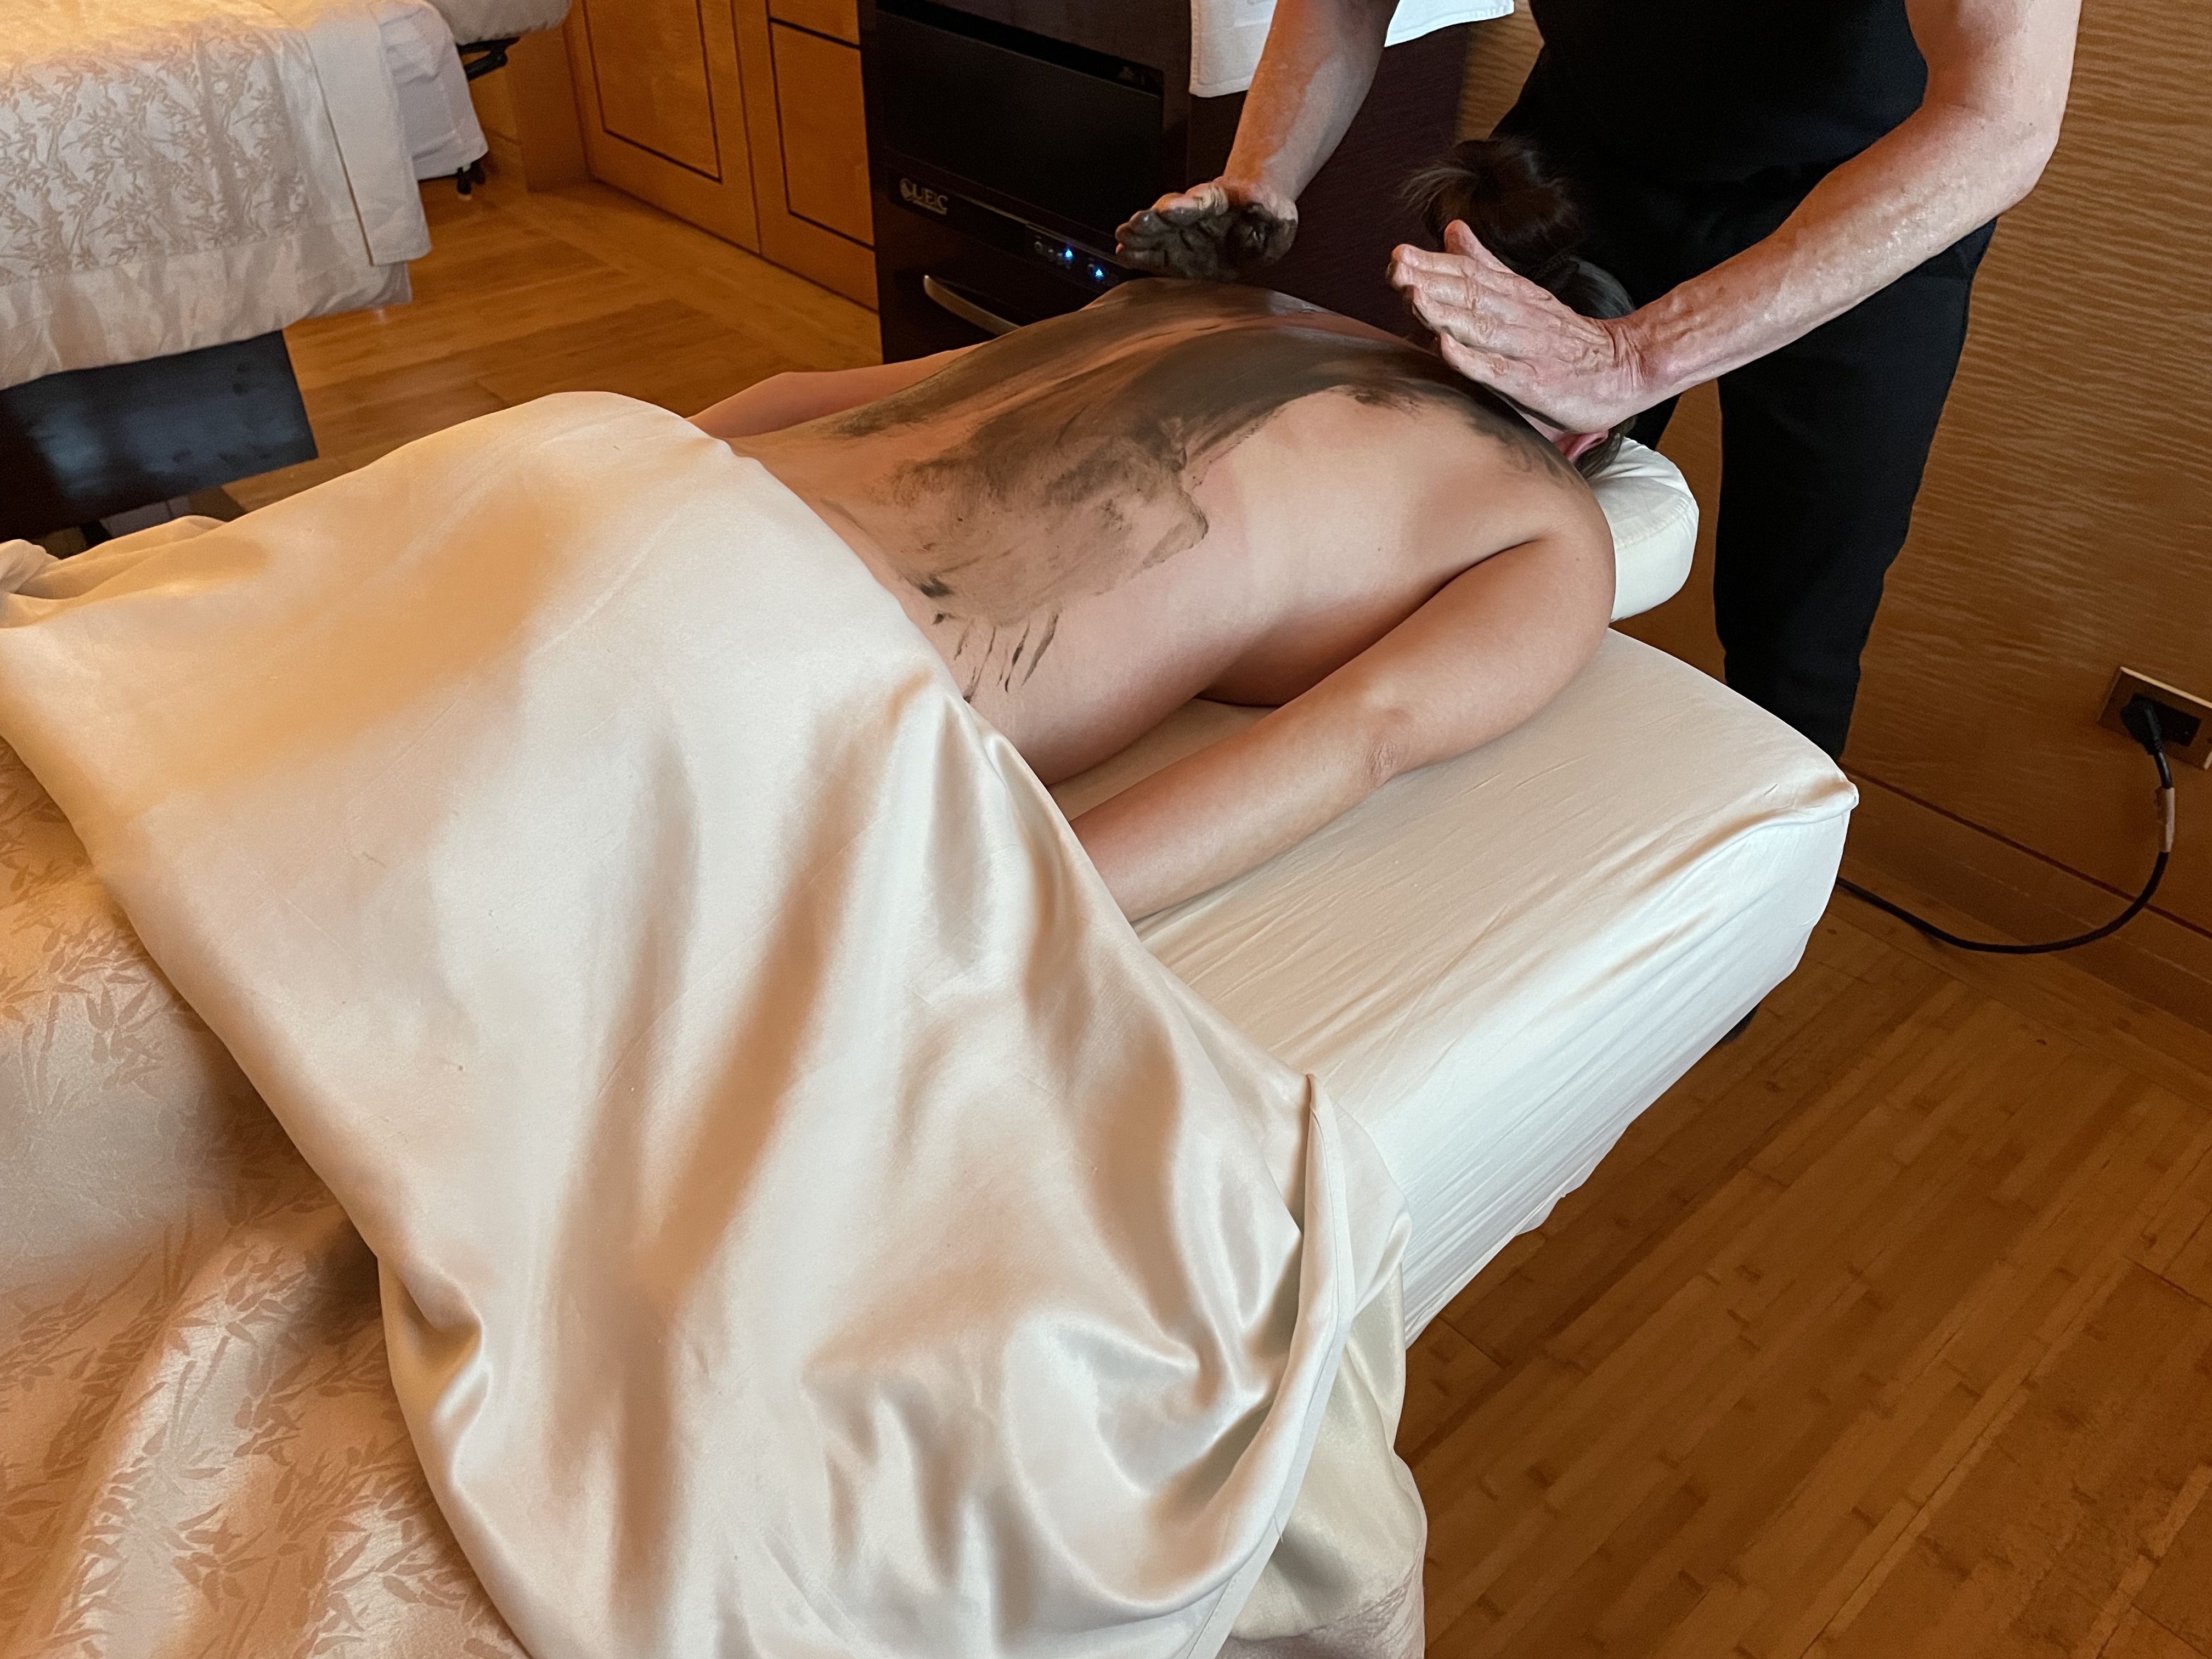 A massage therapist applies a CBD-infused mud mask on the back of a woman during a spa treatment.